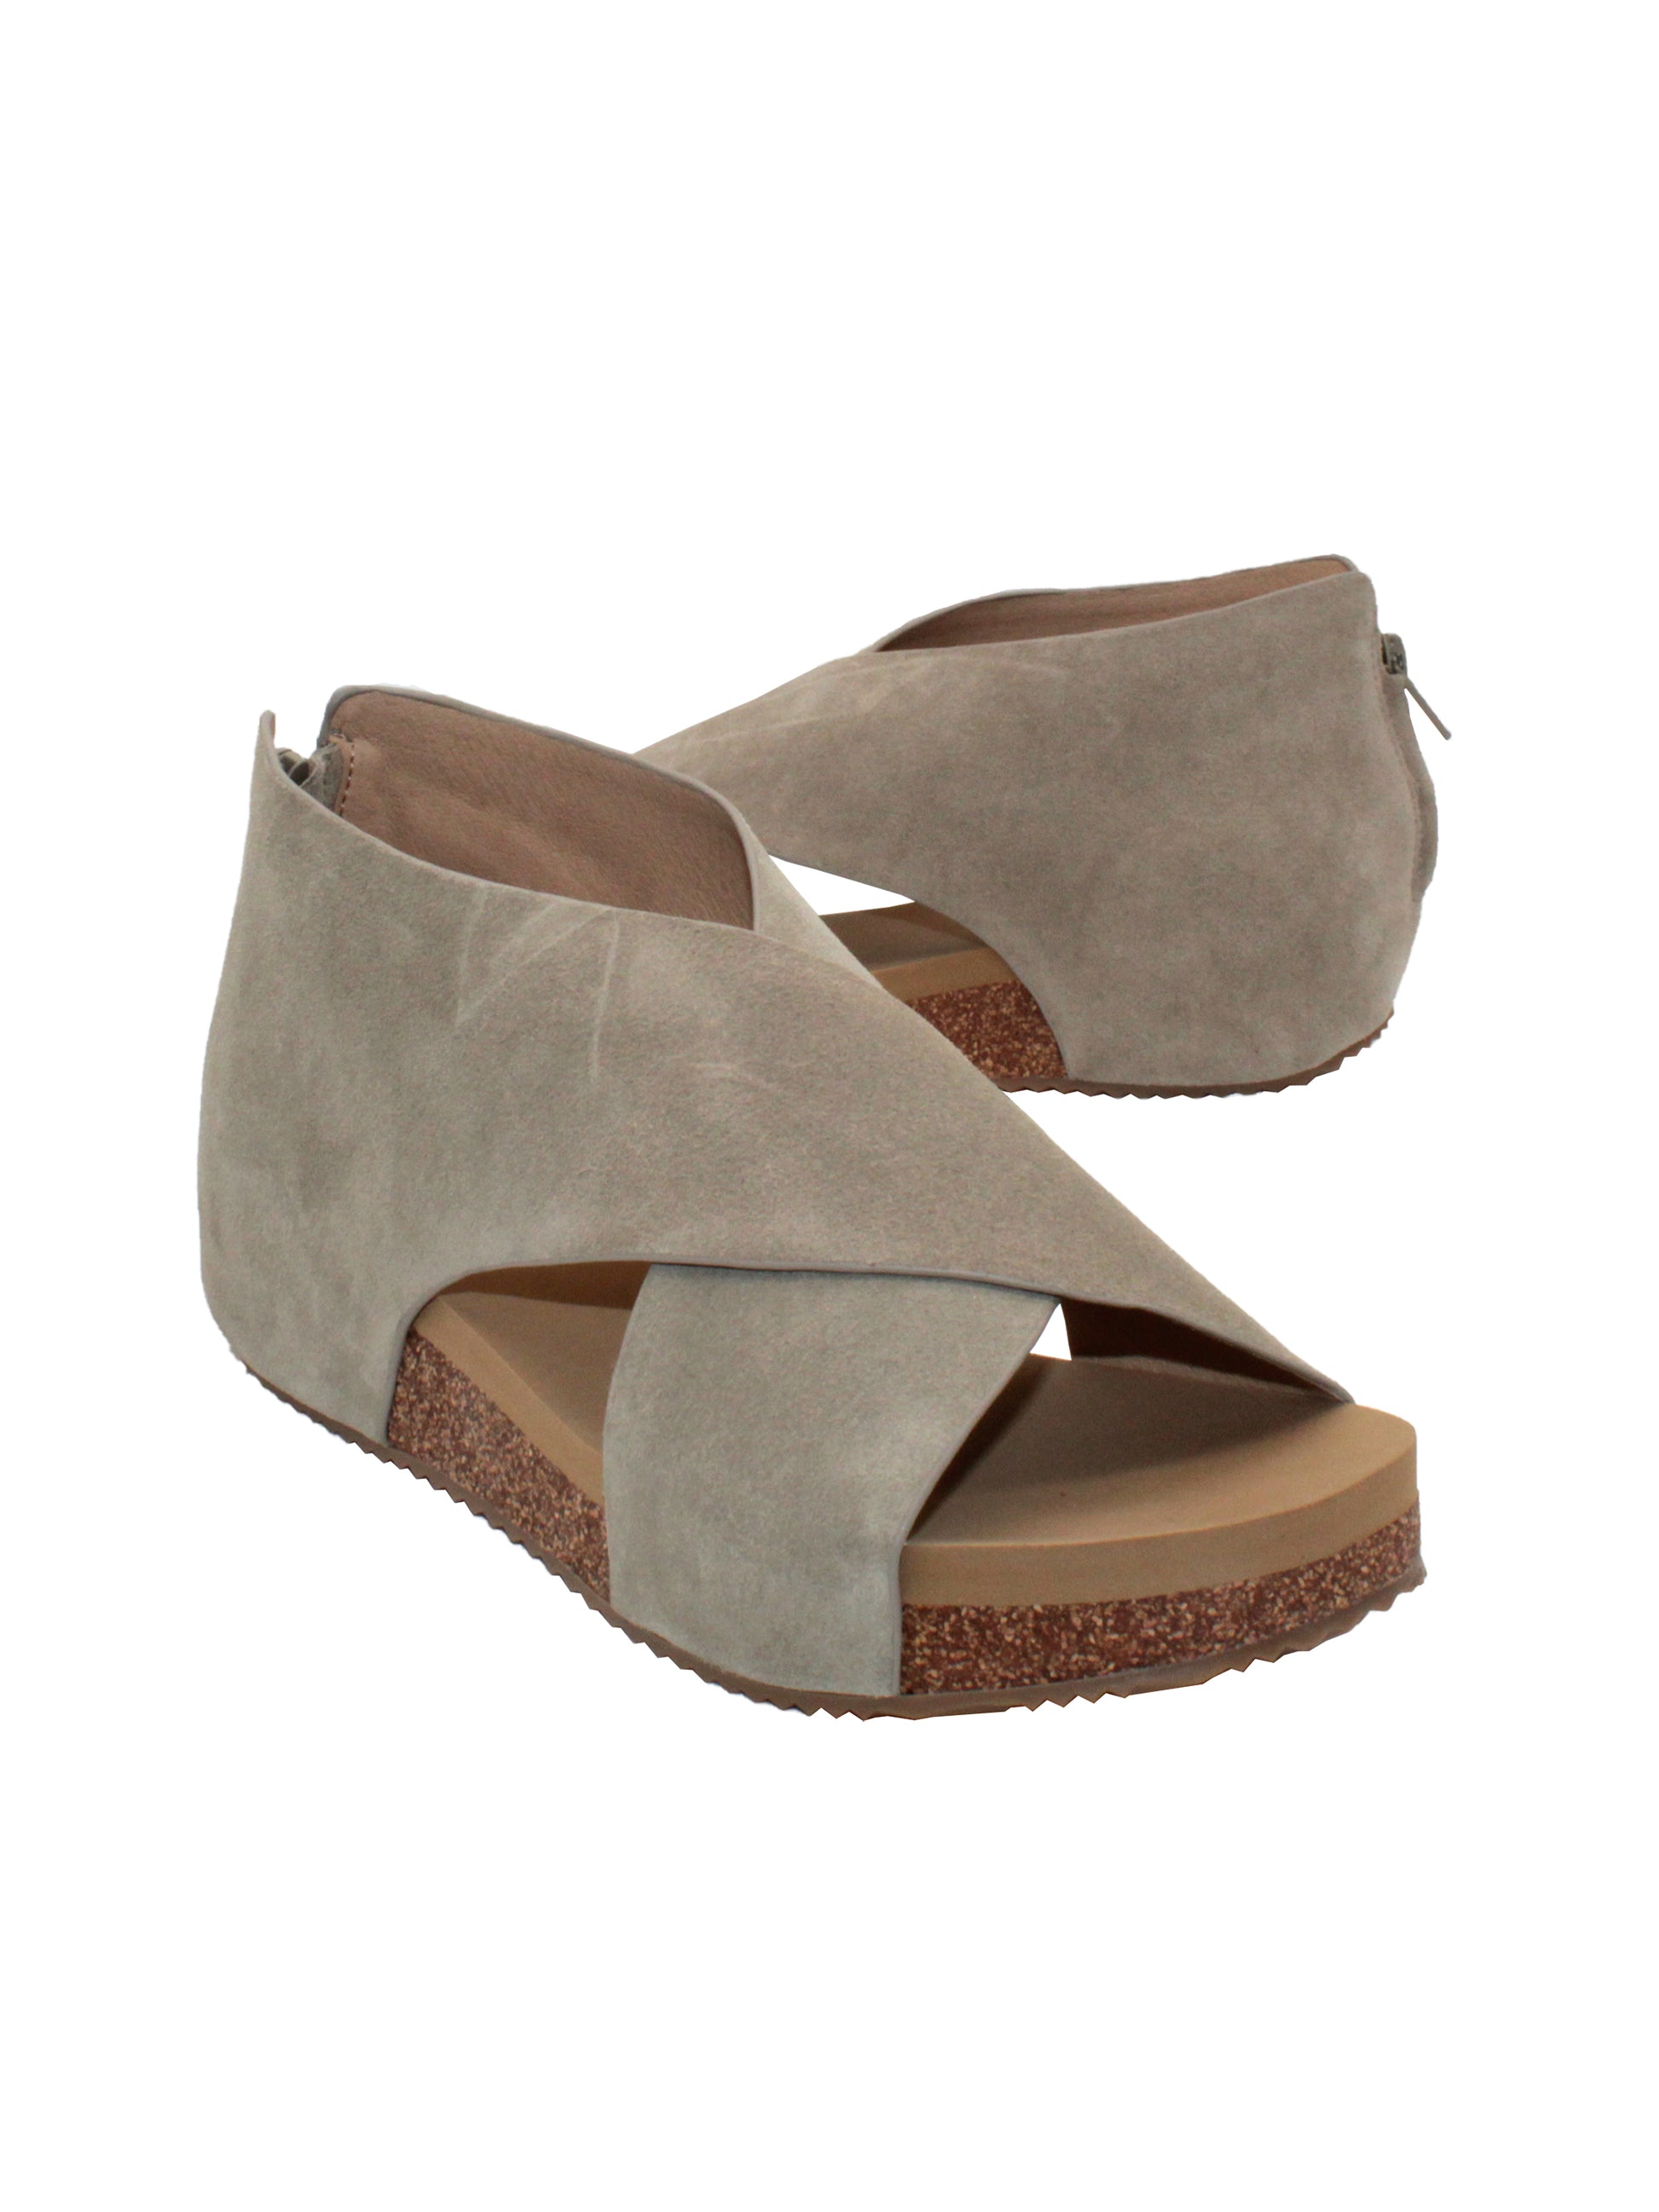 The ‘Alton’ gray sandals by Volatile are made from plush genuine suede and designed with crisscross straps that meet in the back for a closed-but-open effect suitable for year-round styling. Featuring Volatile’s signature ultra-comfort EVA insole stationed on a modest low wedge, and durable, non-skid rubber traction soles, these are ideal for all day walking. 